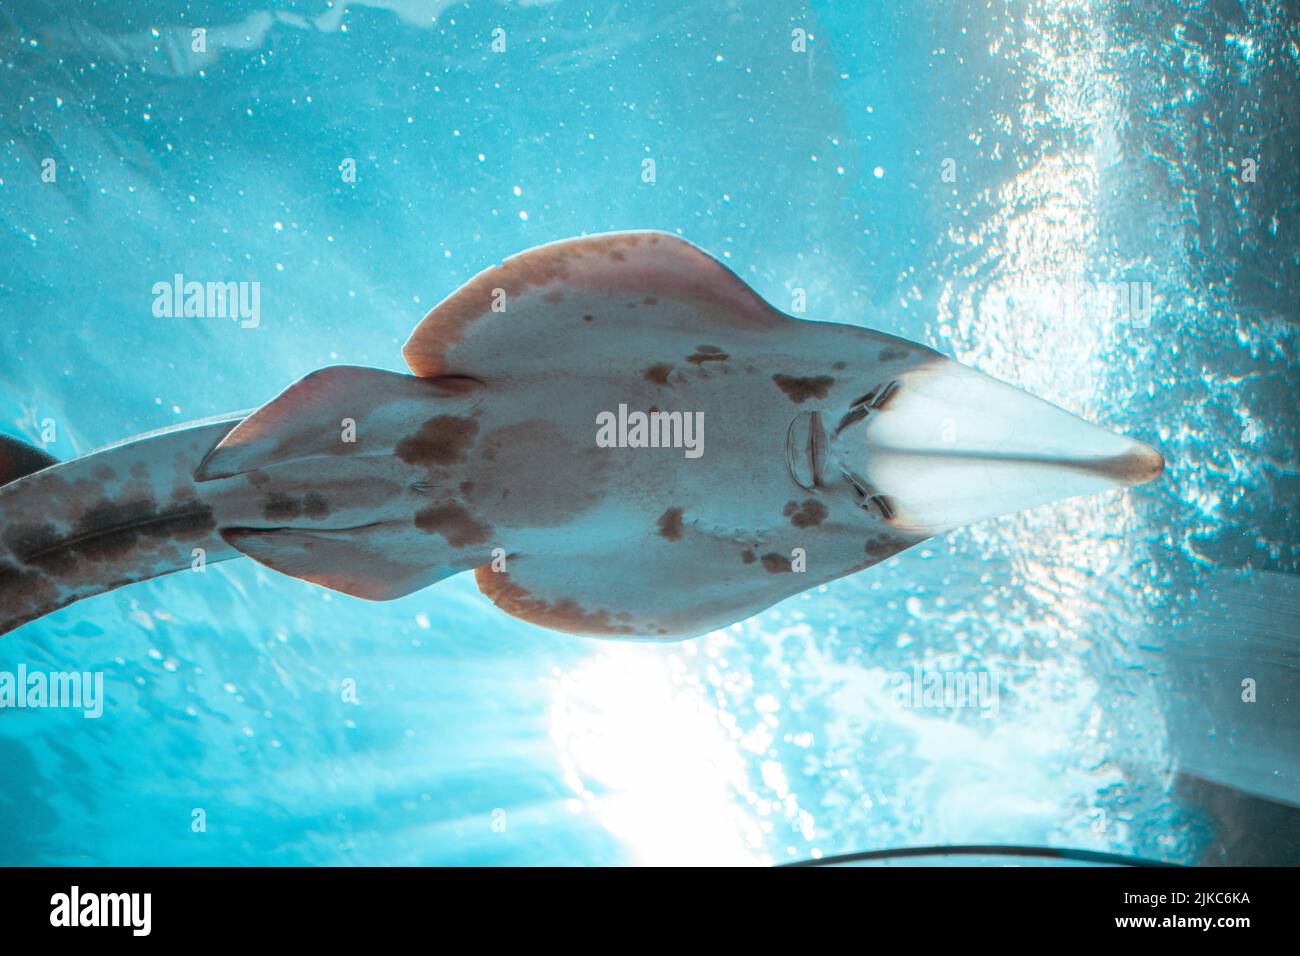 An eastern shovelnose ray (Aptychotrema rostrata) under the water Stock Photo